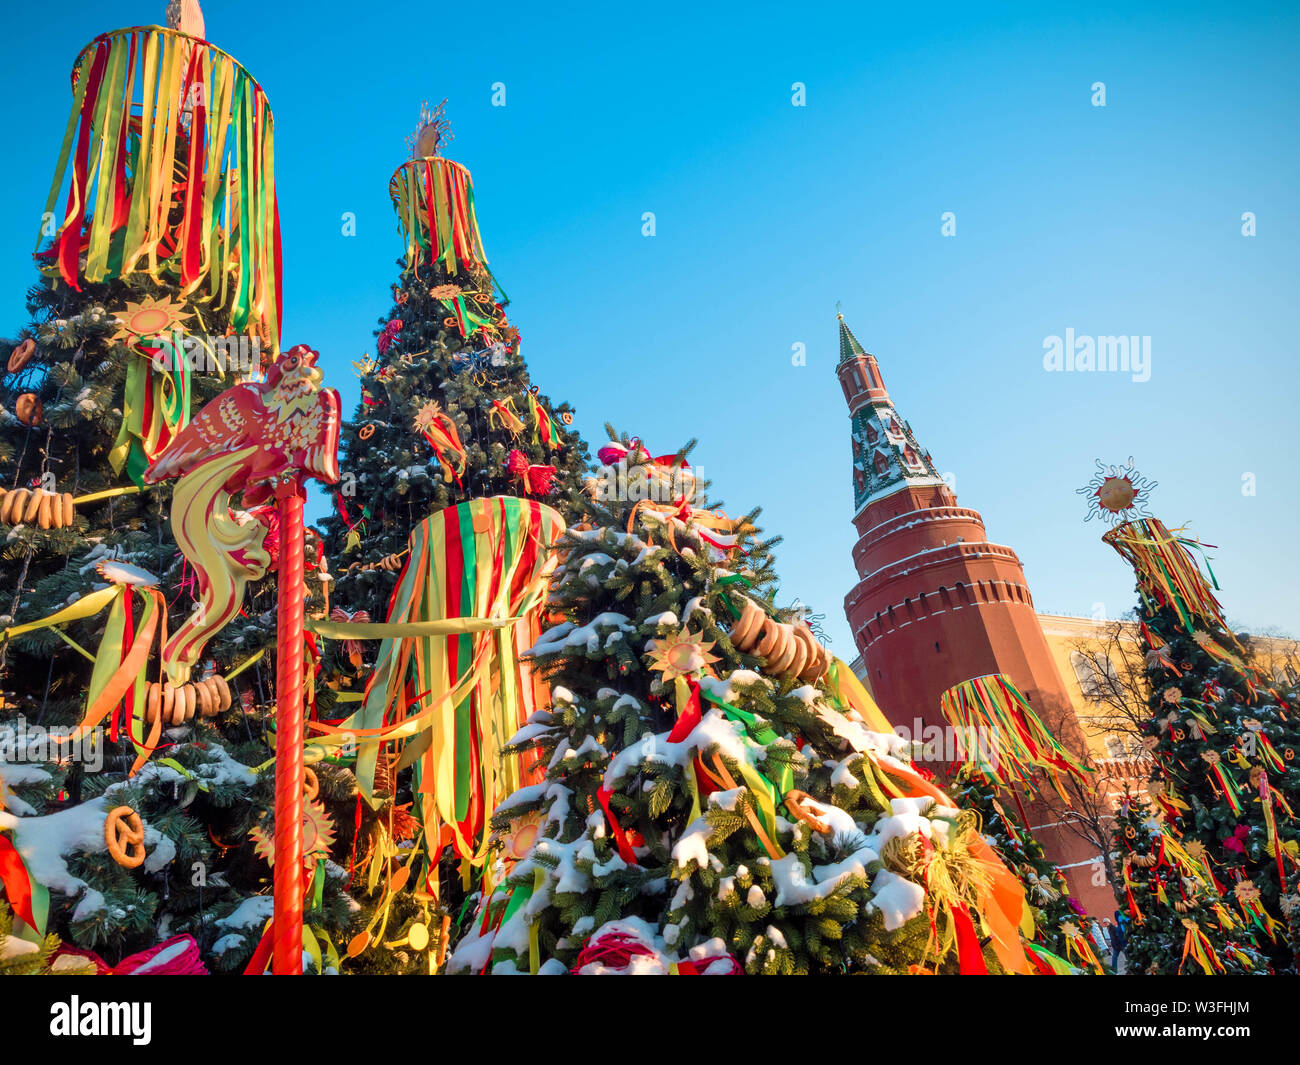 Moscow, Russia - December 1, 2019: Louis Vuitton Storefront, Multicolored  Rainbow Background Backdrop Design, Glasses Scarf and Editorial Photo -  Image of color, fashionable: 167297871